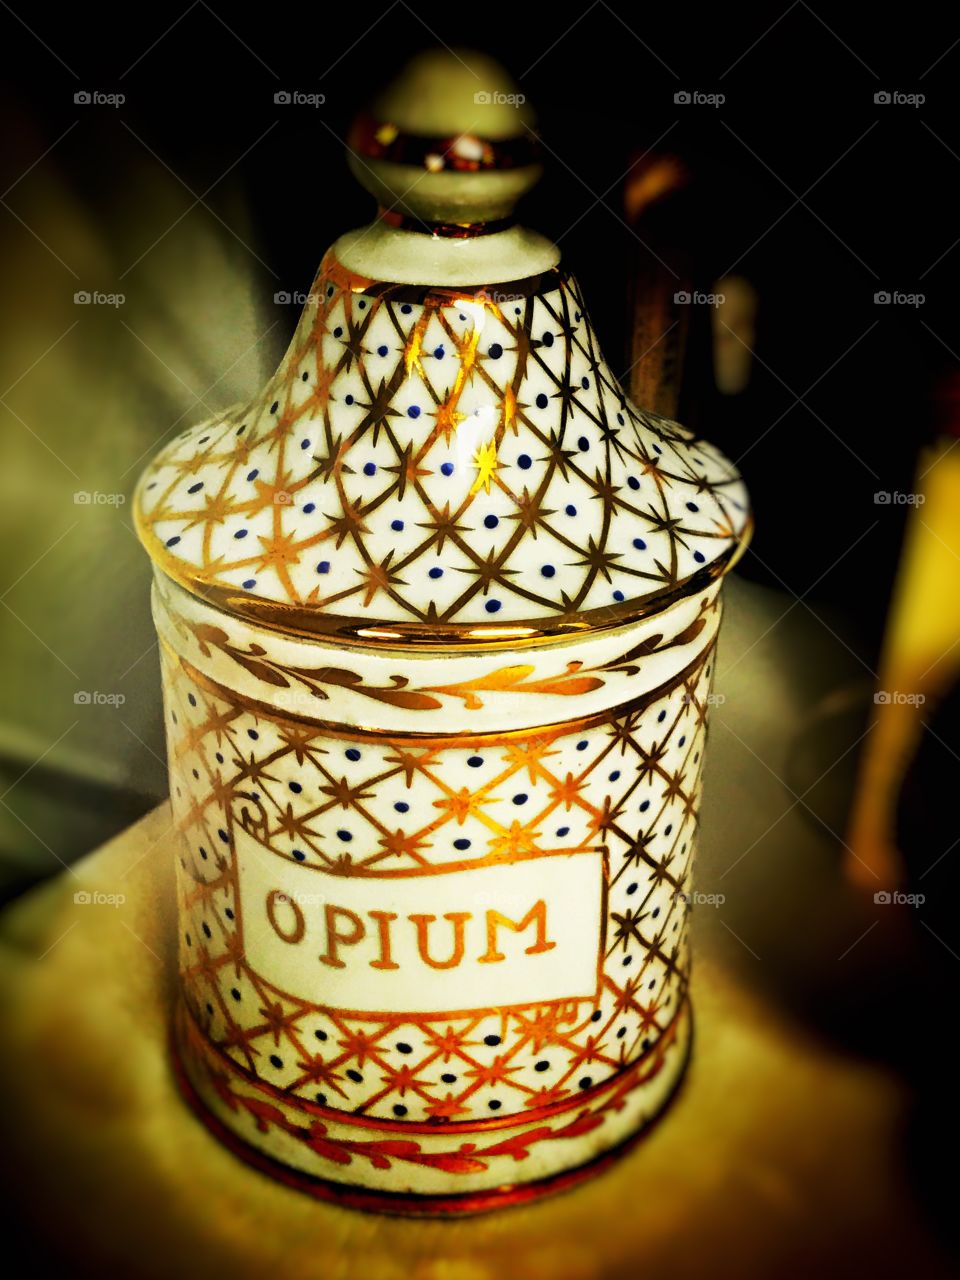 Antique opium bottle circa 1835 with gold leaf detailing filled with jelly beans